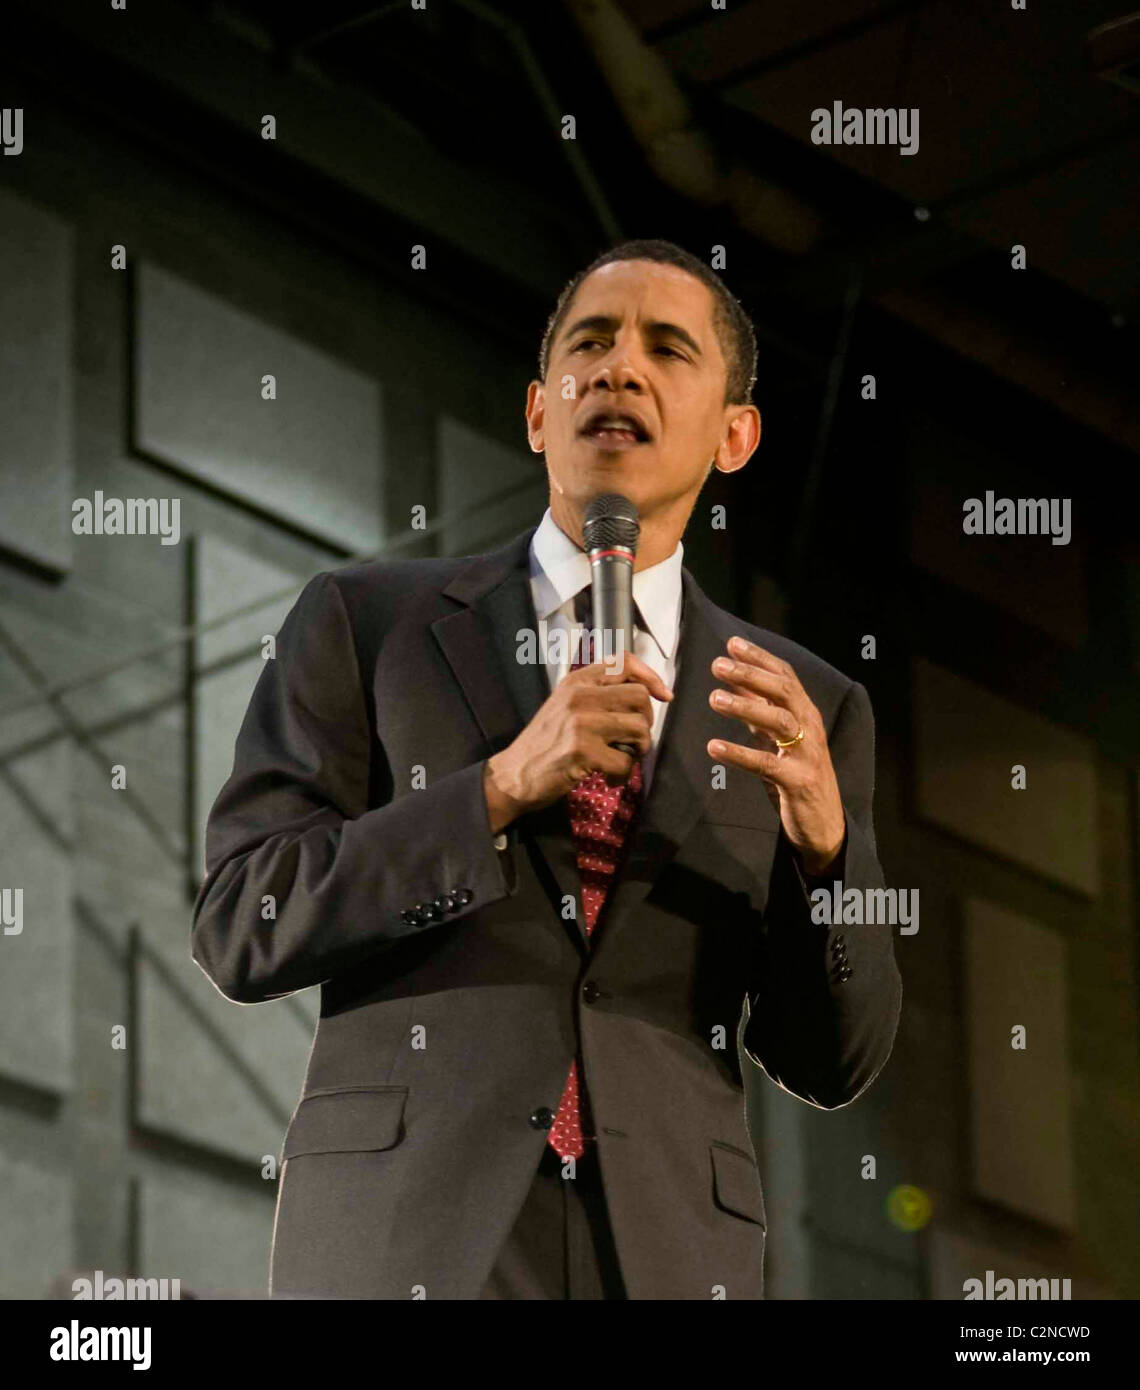 Democratic presidential candidate Senator Barack Obama speaks during a rally at Muhlenberg College Allentown, Pennsylvania - Stock Photo